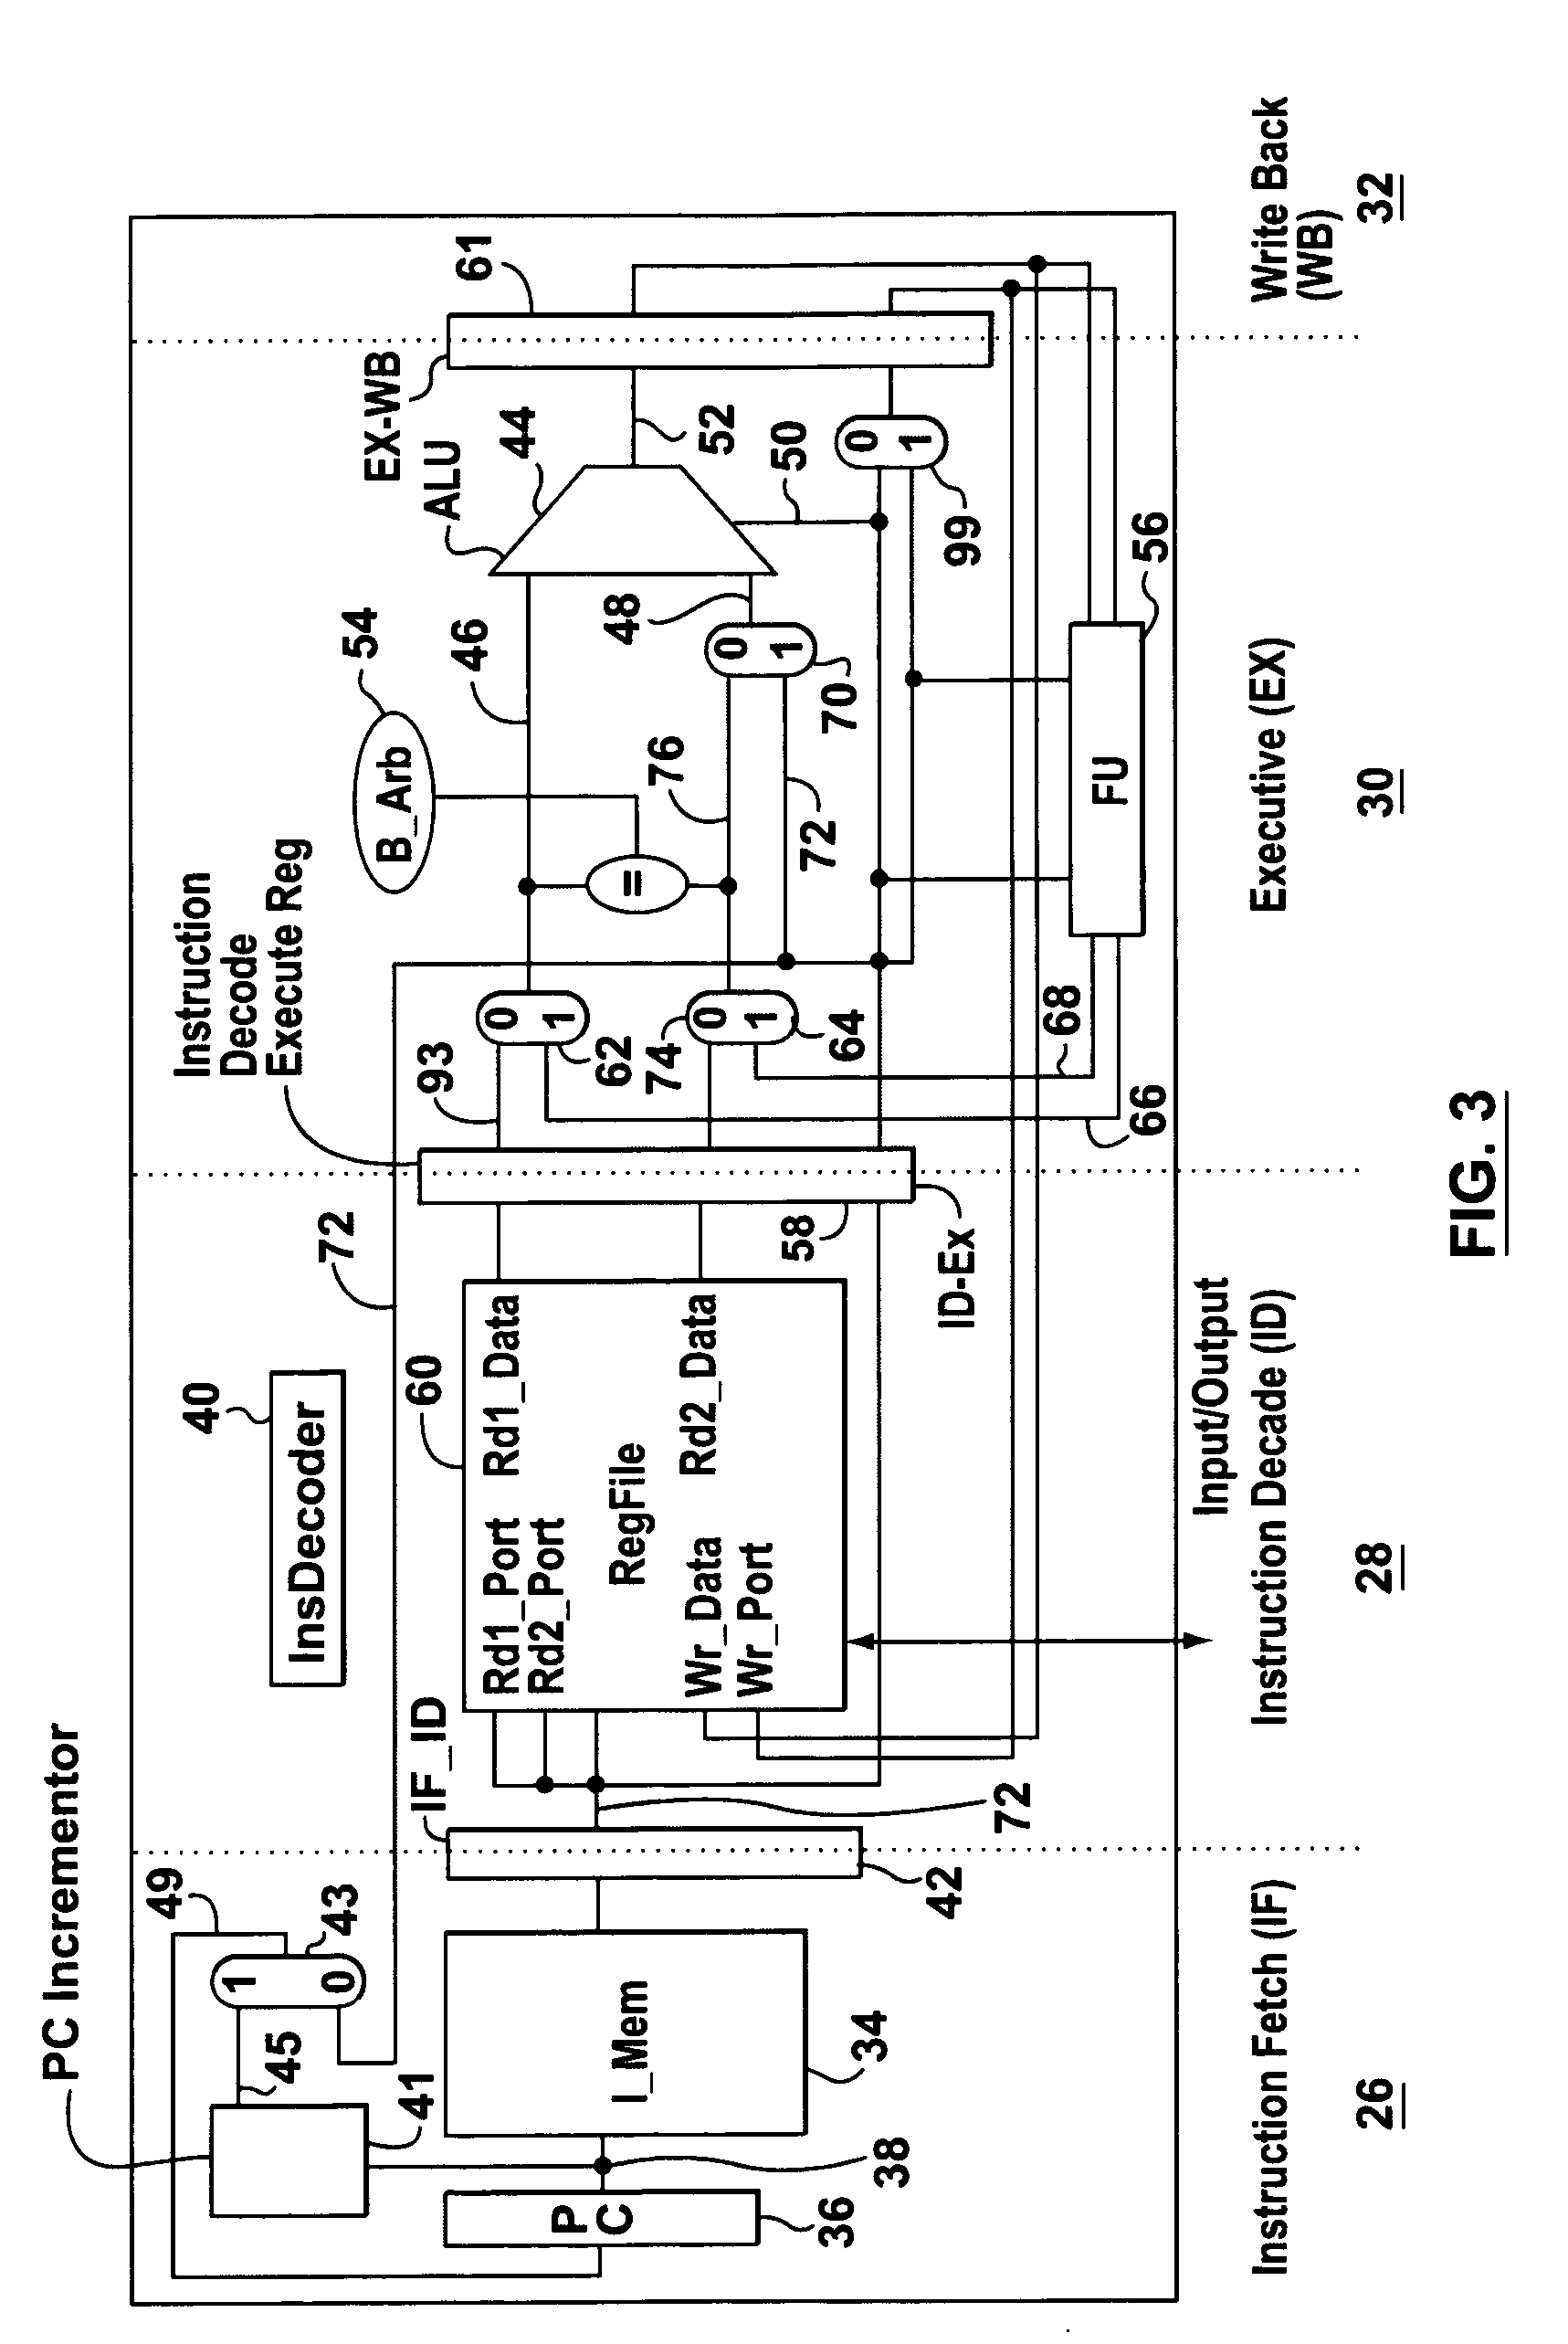 Packet processor with mild programmability